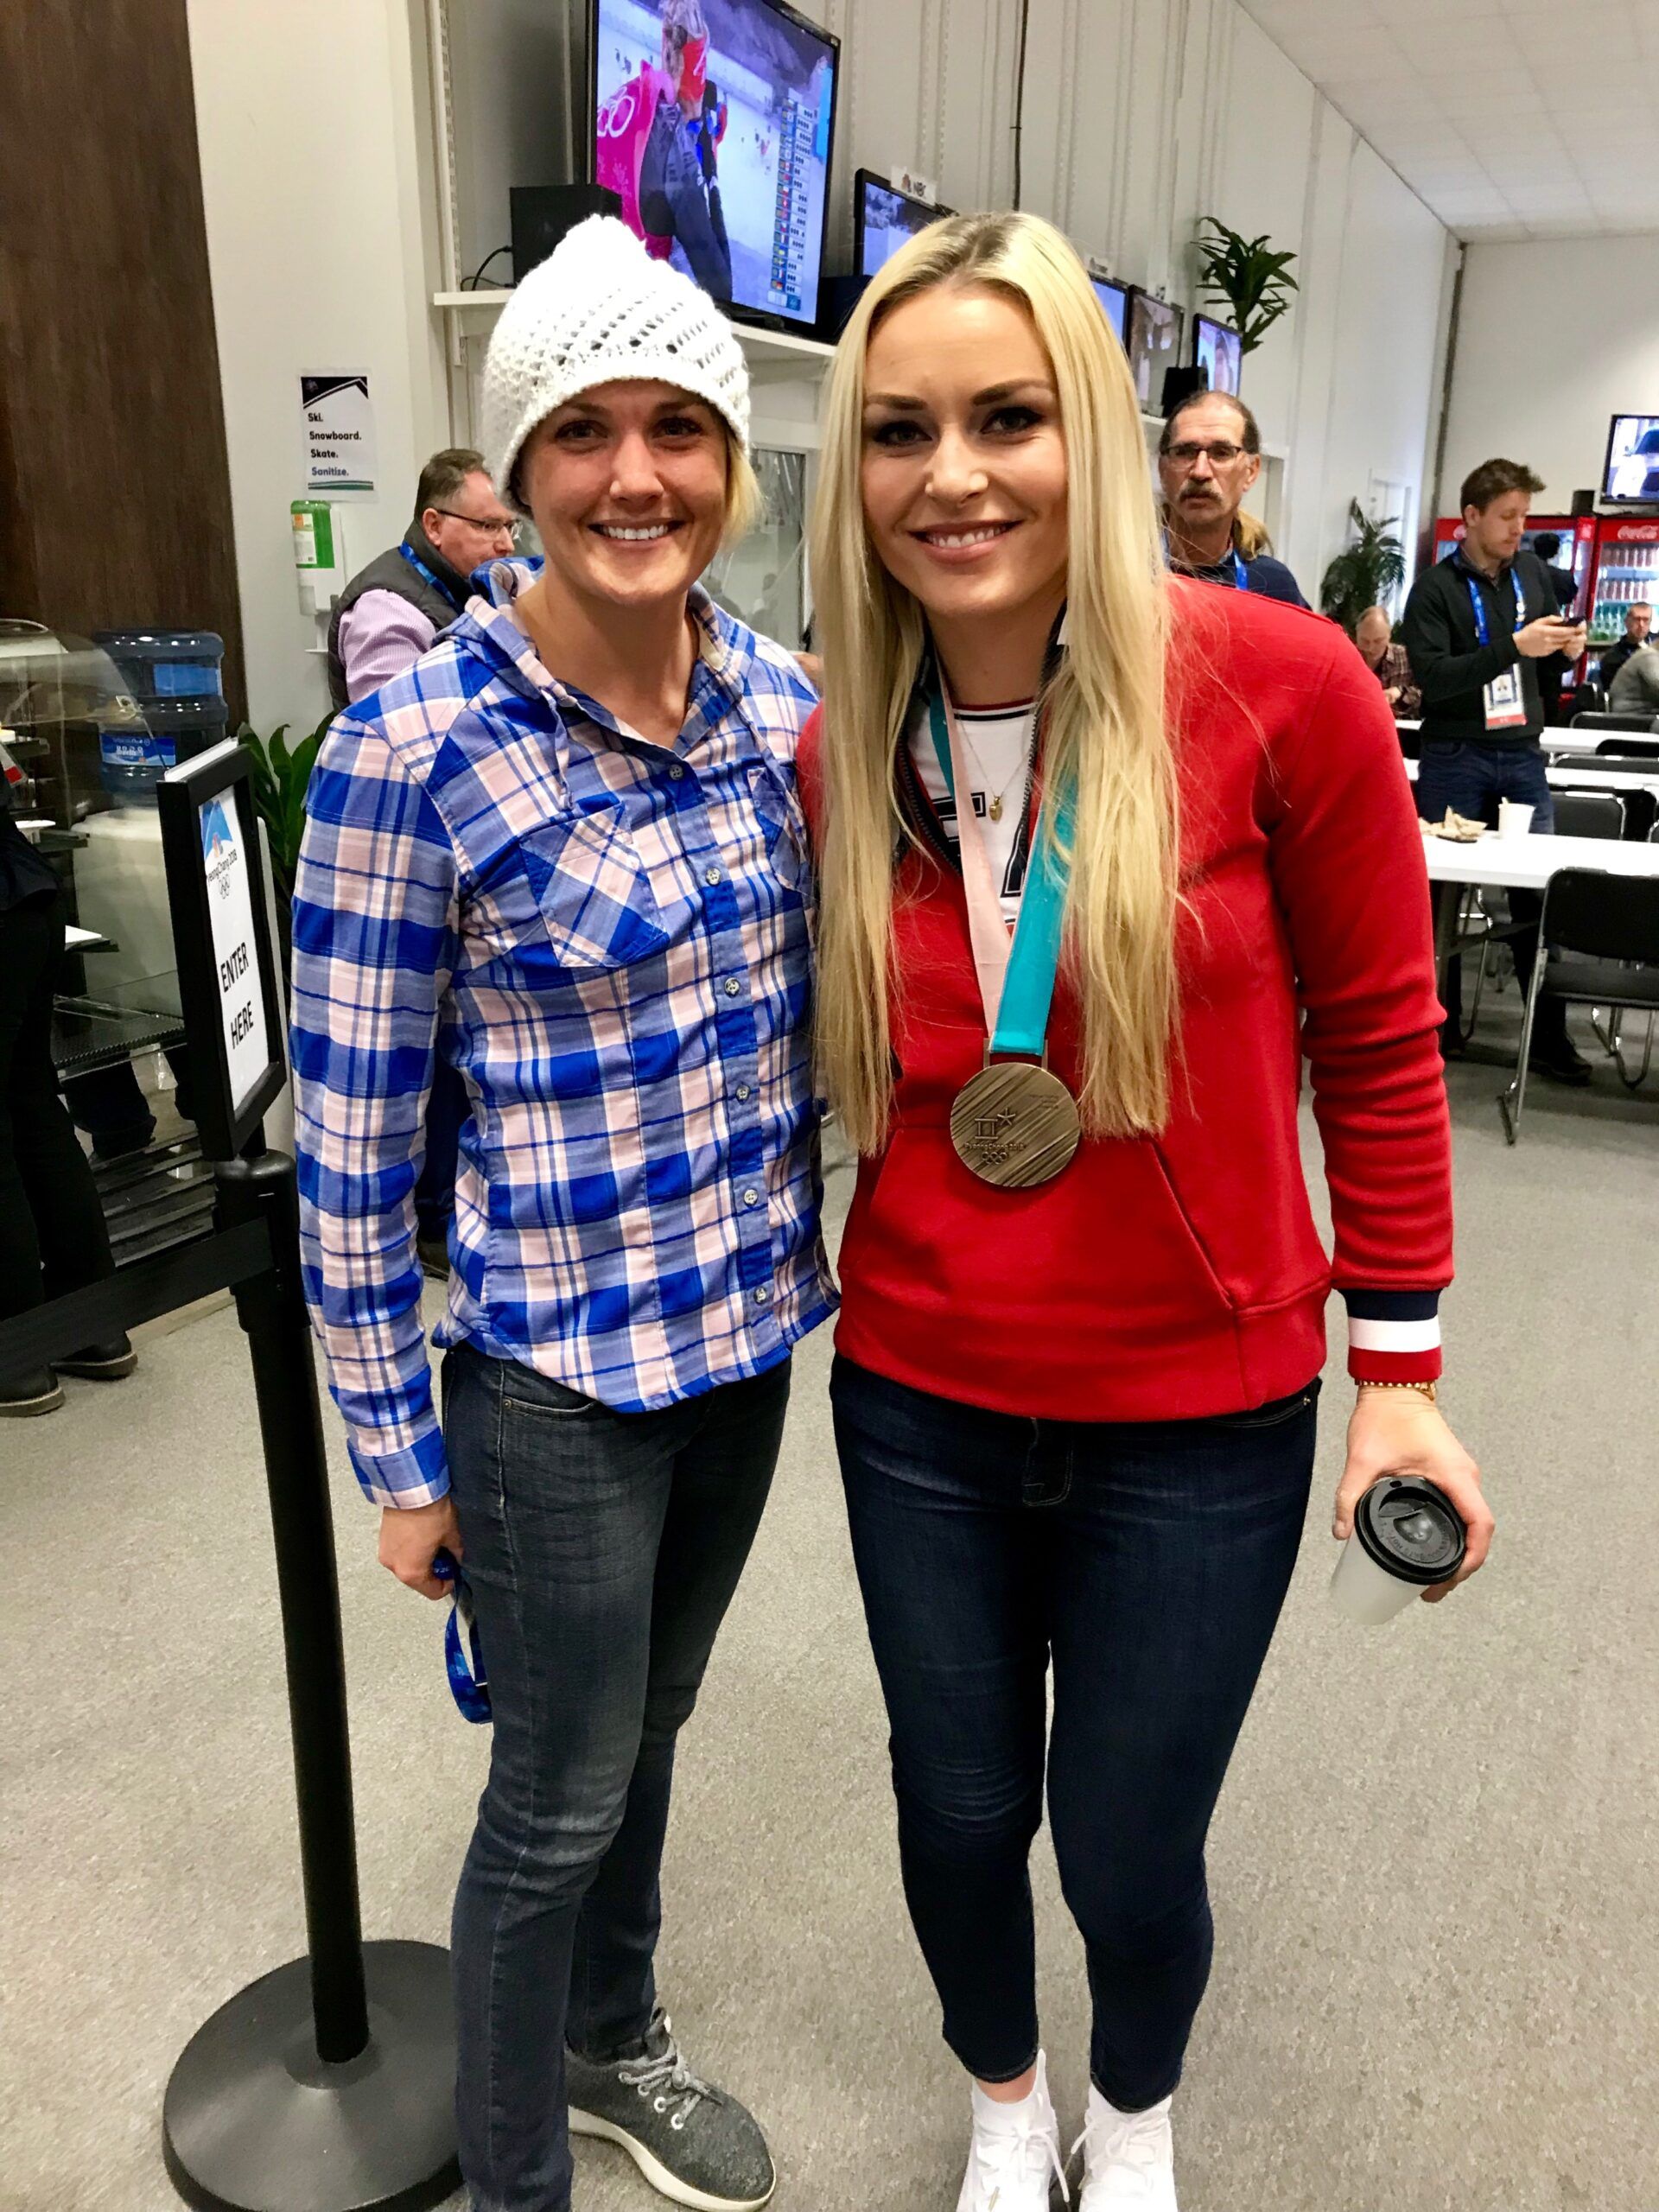 Julia Clukey pictured with Olympic alpine skier Lindsey Vonn